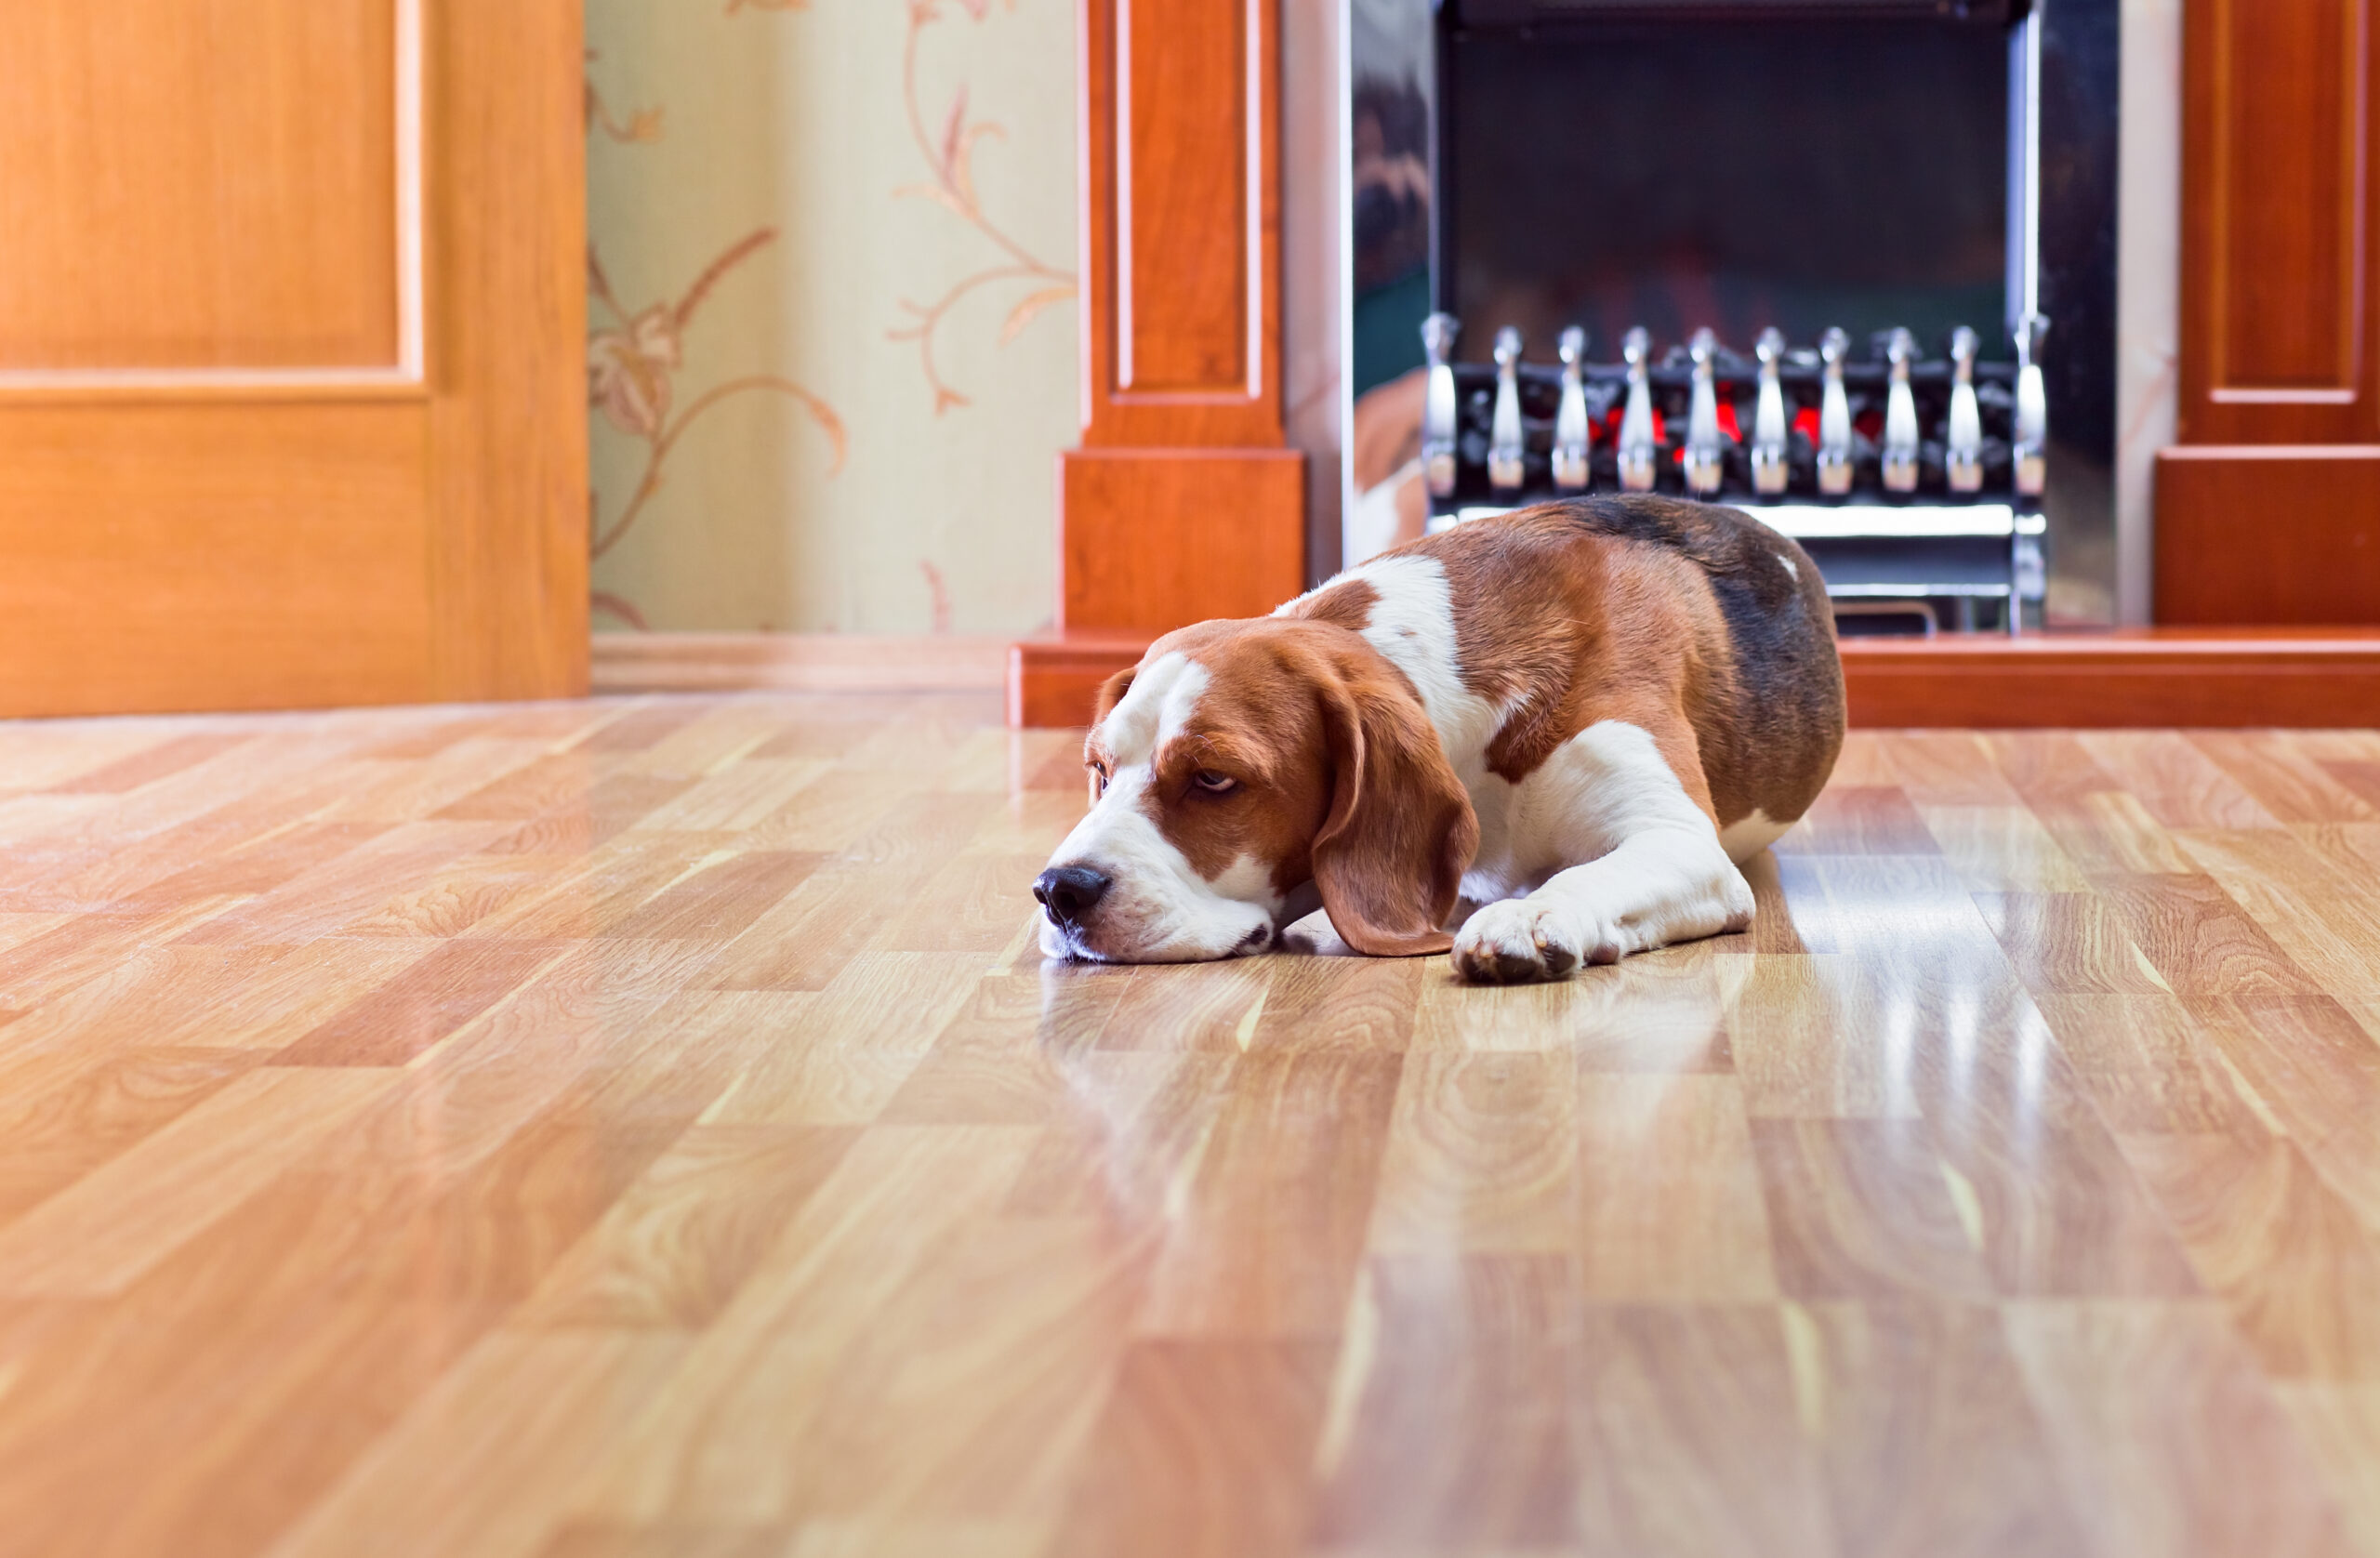 Armstrong Citywide Provides the Best Hardwood Floor Refinishing in Overland Park